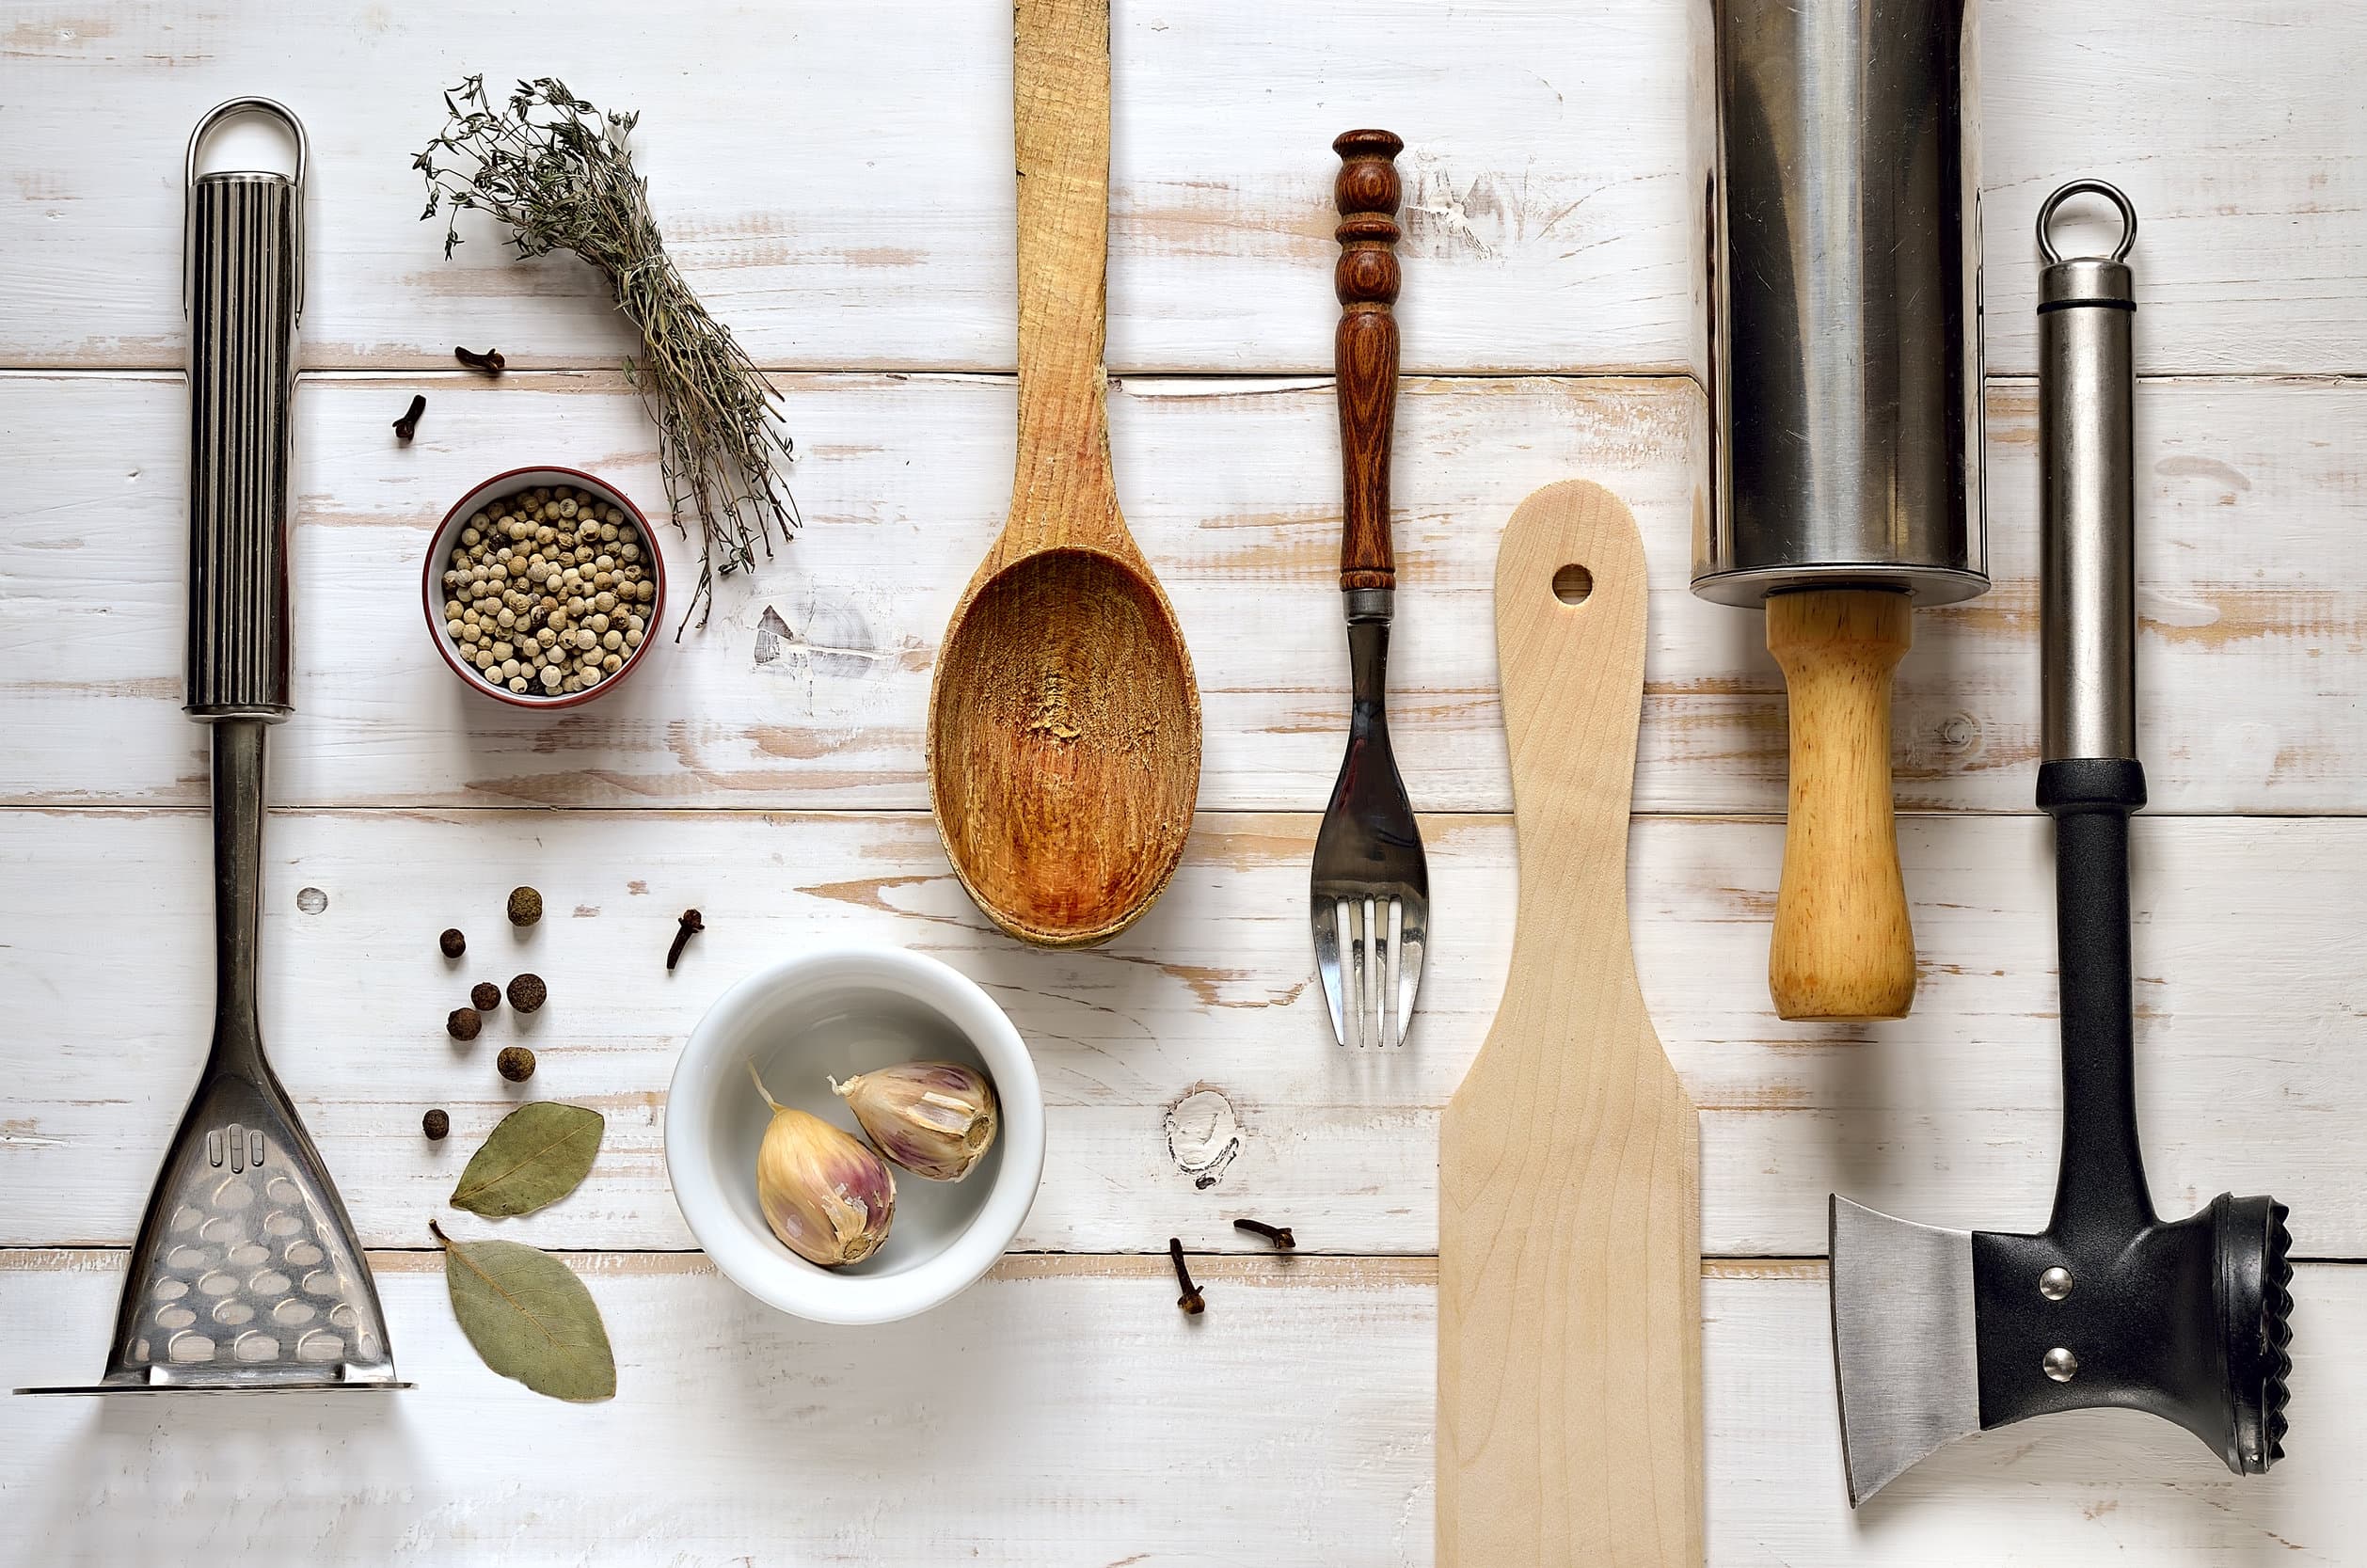 11 Inexpensive Restaurant Tools Every Home Cook Should Have